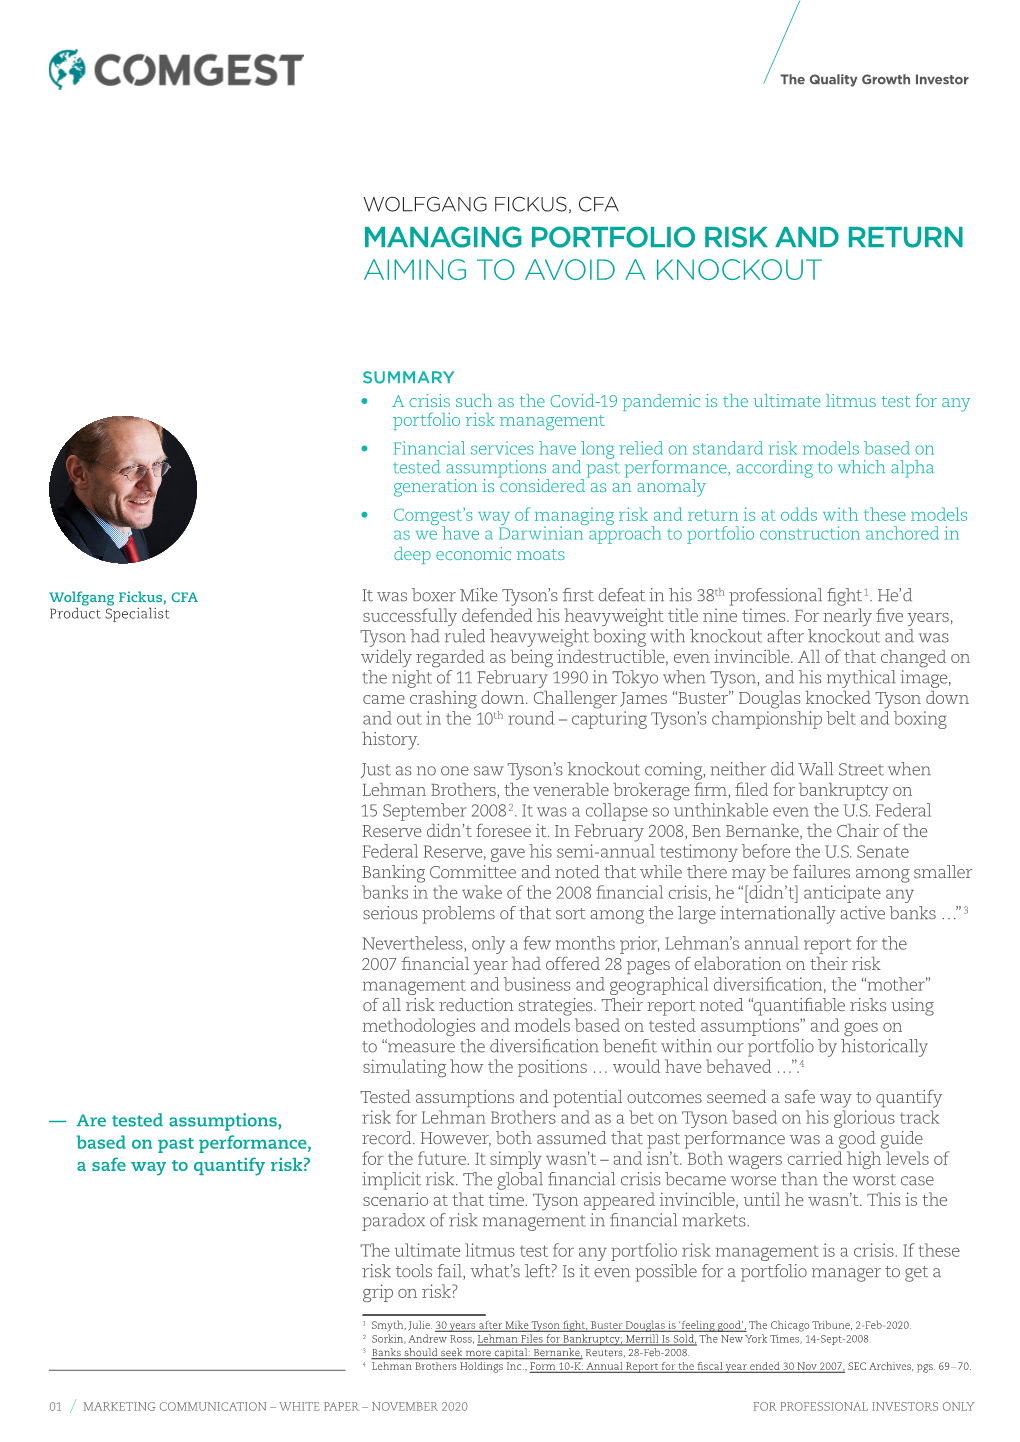 Managing Portfolio Risk and Return Aiming to Avoid a Knockout